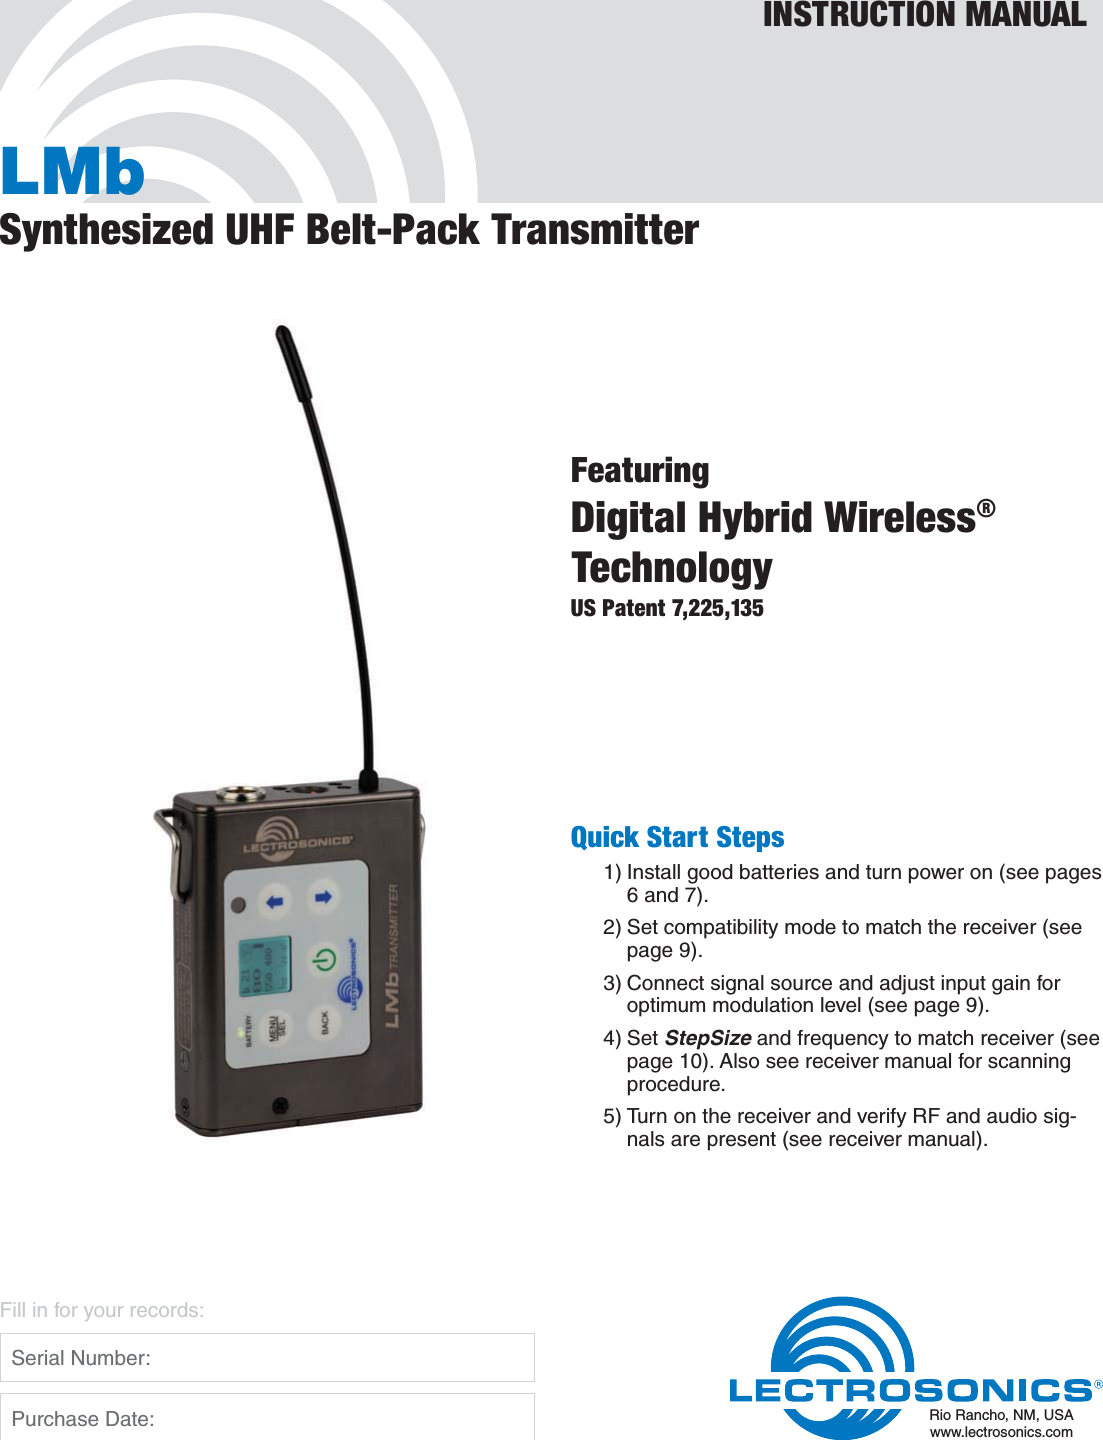 LMbSynthesized UHF Belt-Pack TransmitterFeaturingDigital Hybrid Wireless®TechnologyUS Patent 7,225,135INSTRUCTION MANUALRio Rancho, NM, USAwww.lectrosonics.comFill in for your records:  Serial Number:  Purchase Date:Quick Start Steps1) Install good batteries and turn power on (see pages 6 and 7).2) Set compatibility mode to match the receiver (see page 9).3) Connect signal source and adjust input gain for optimum modulation level (see page 9).4) Set StepSize and frequency to match receiver (see page 10). Also see receiver manual for scanning procedure.5) Turn on the receiver and verify RF and audio sig-nals are present (see receiver manual).